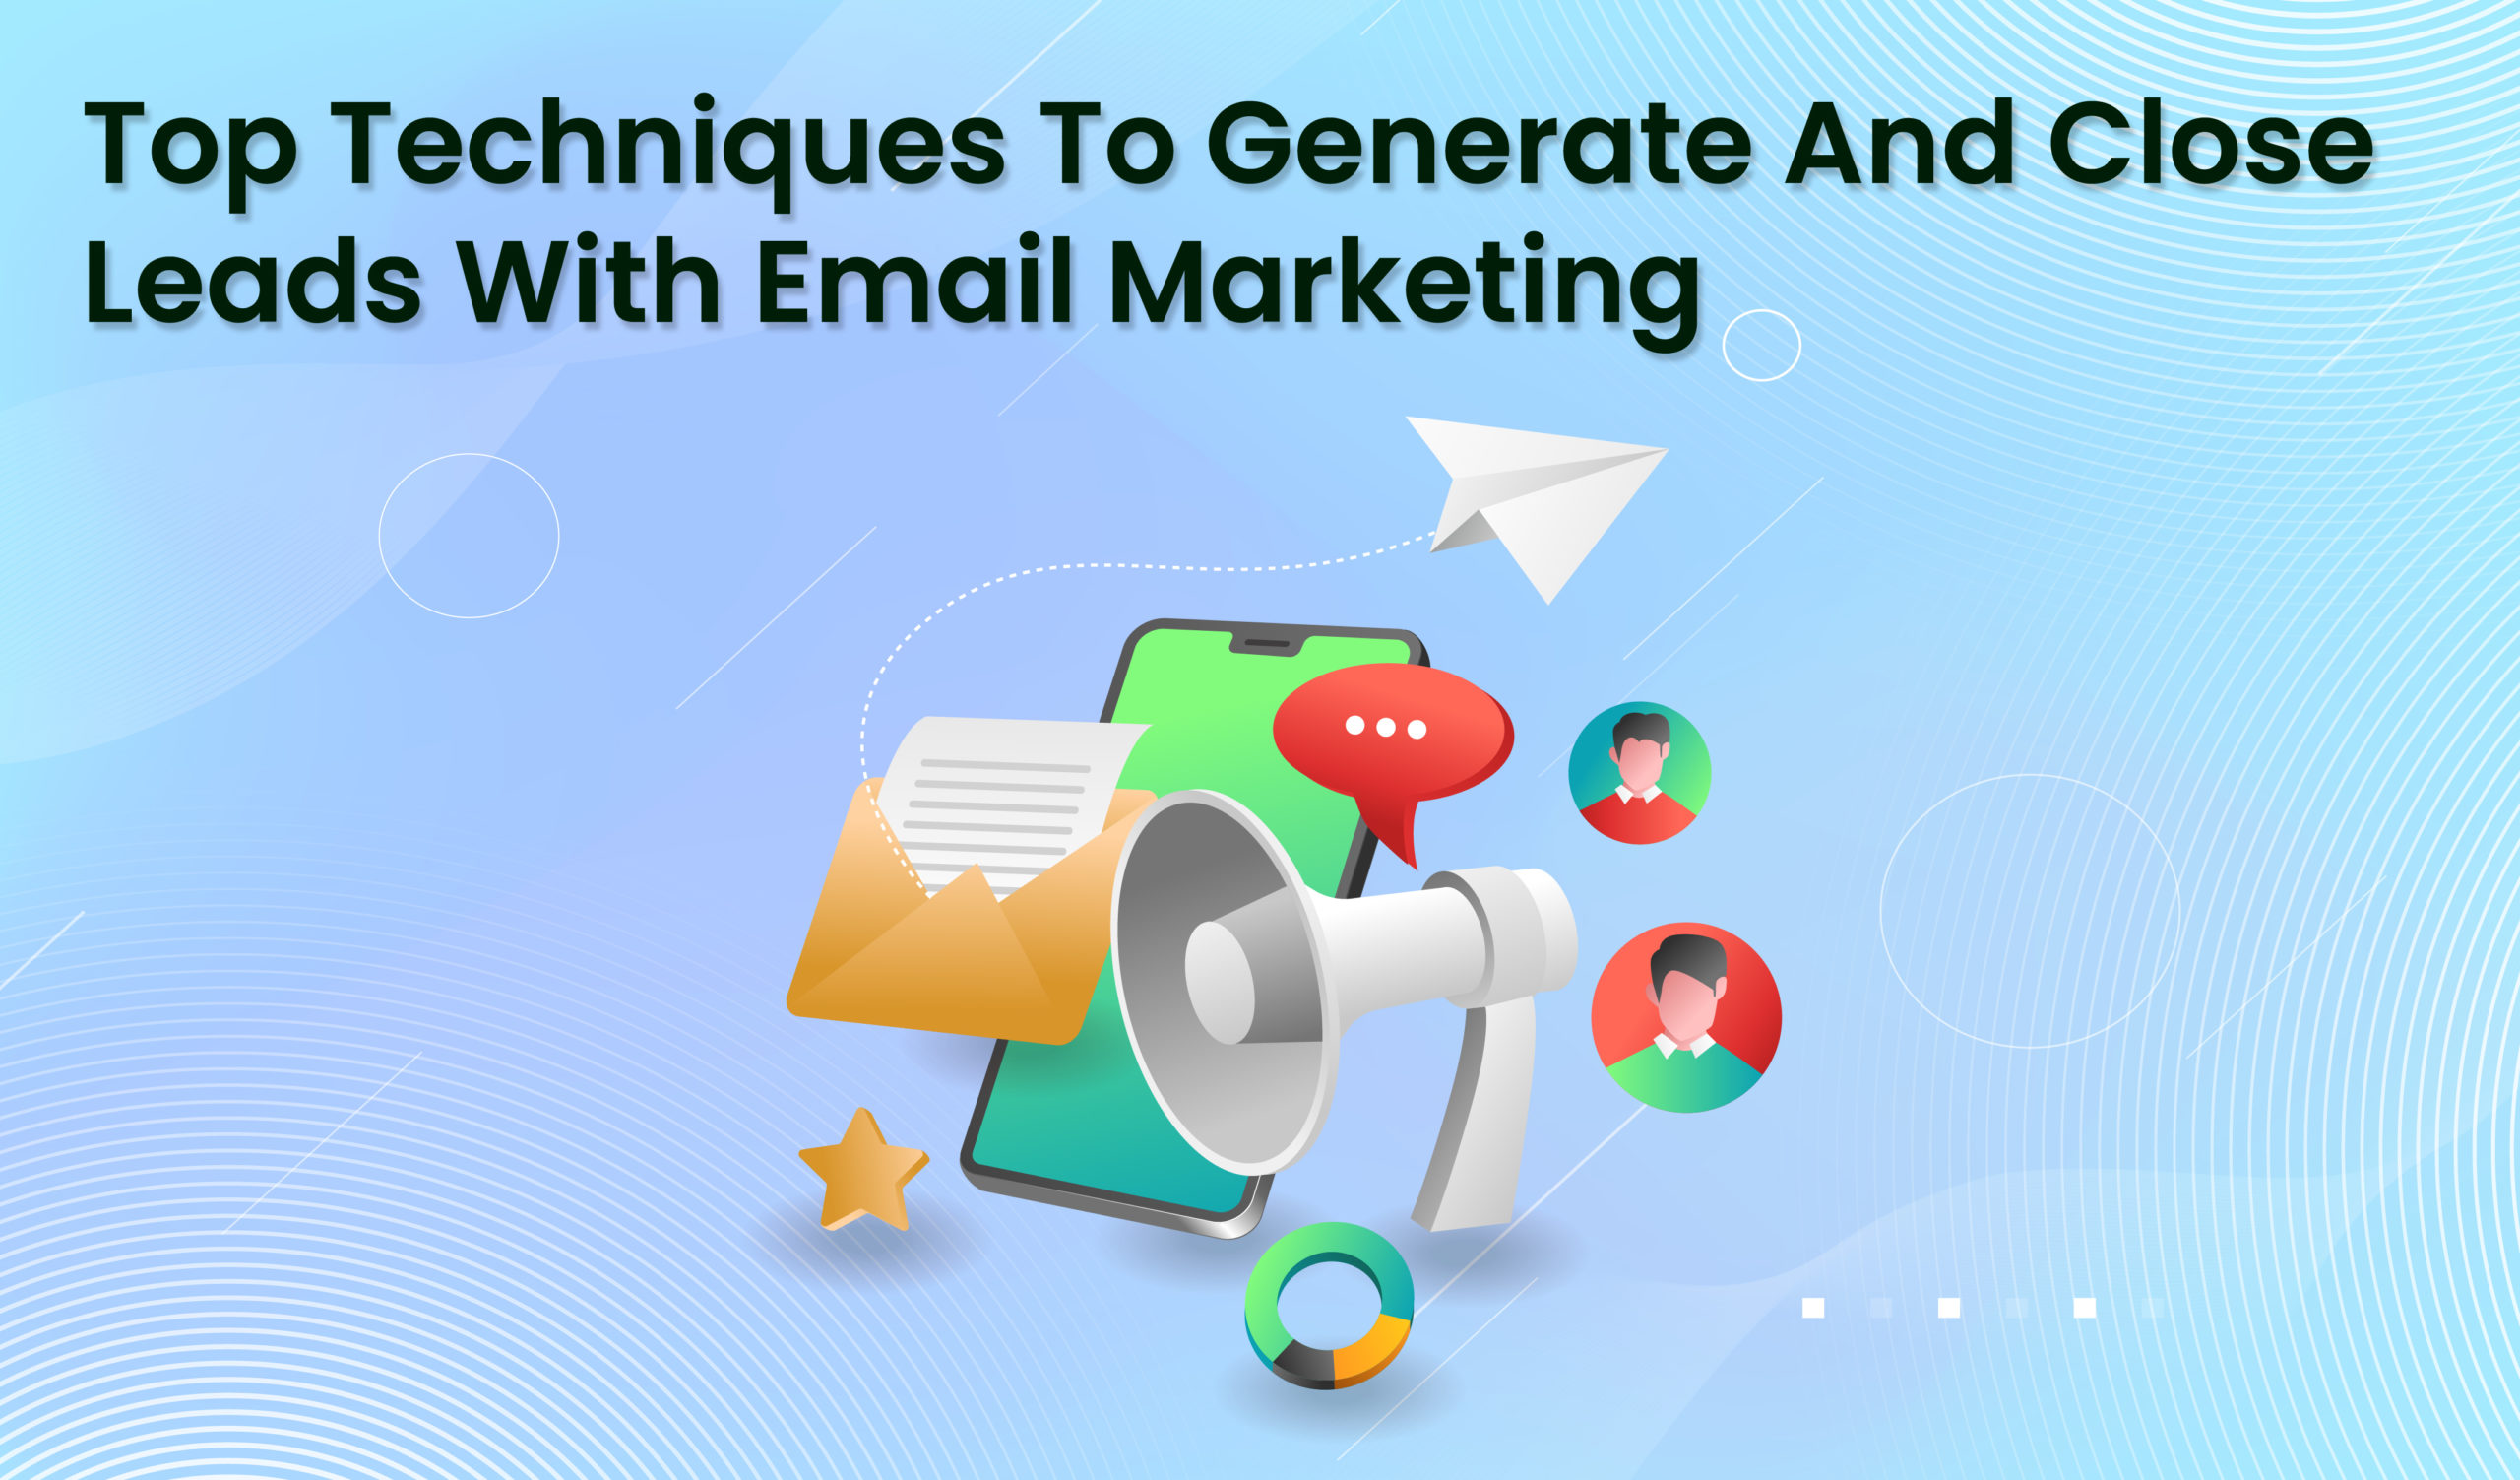 Top Techniques To Generate And Close Leads With Email Marketing